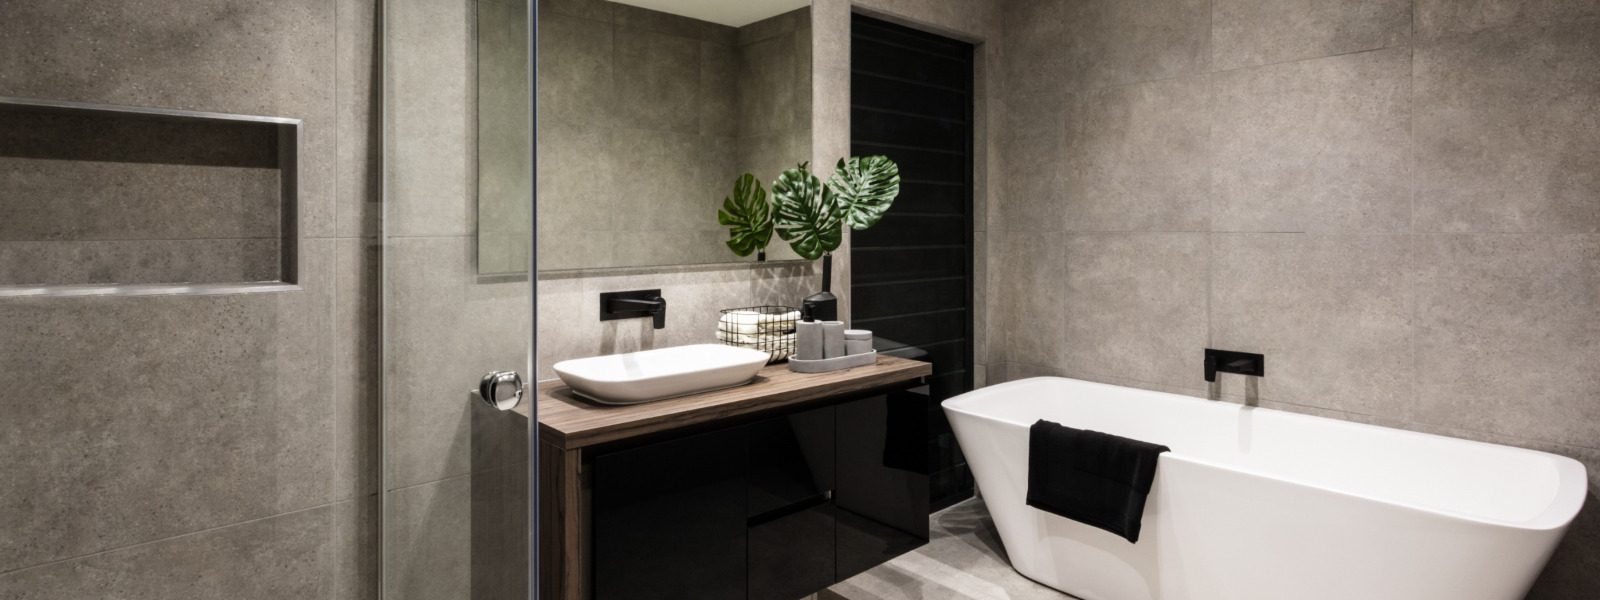 Discover clever tips and tricks to transform your bathroom without breaking the bank. From small updates to major renovations, these hacks will help you create a stunning bathroom that reflects your style and meets your needs.